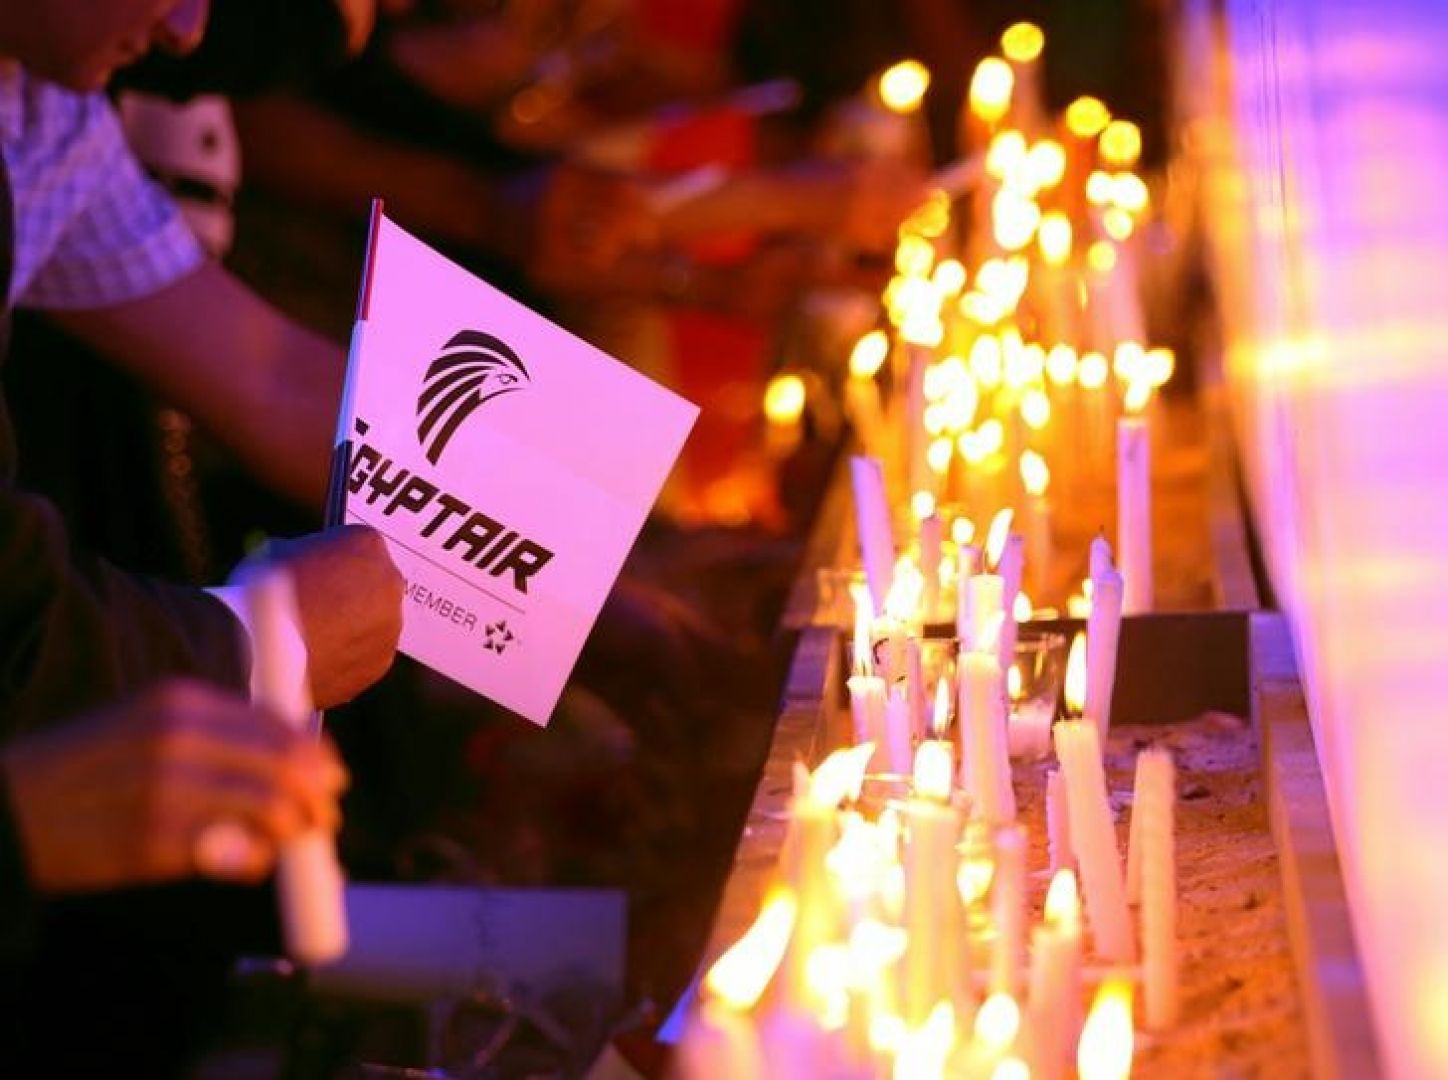 People light candles during a candlelight vigil for the victims of EgyptAir flight 804, at the Cairo Opera house in Cairo, Egypt May 26, 2016. REUTERS/MOHAMED ABD EL GHANY